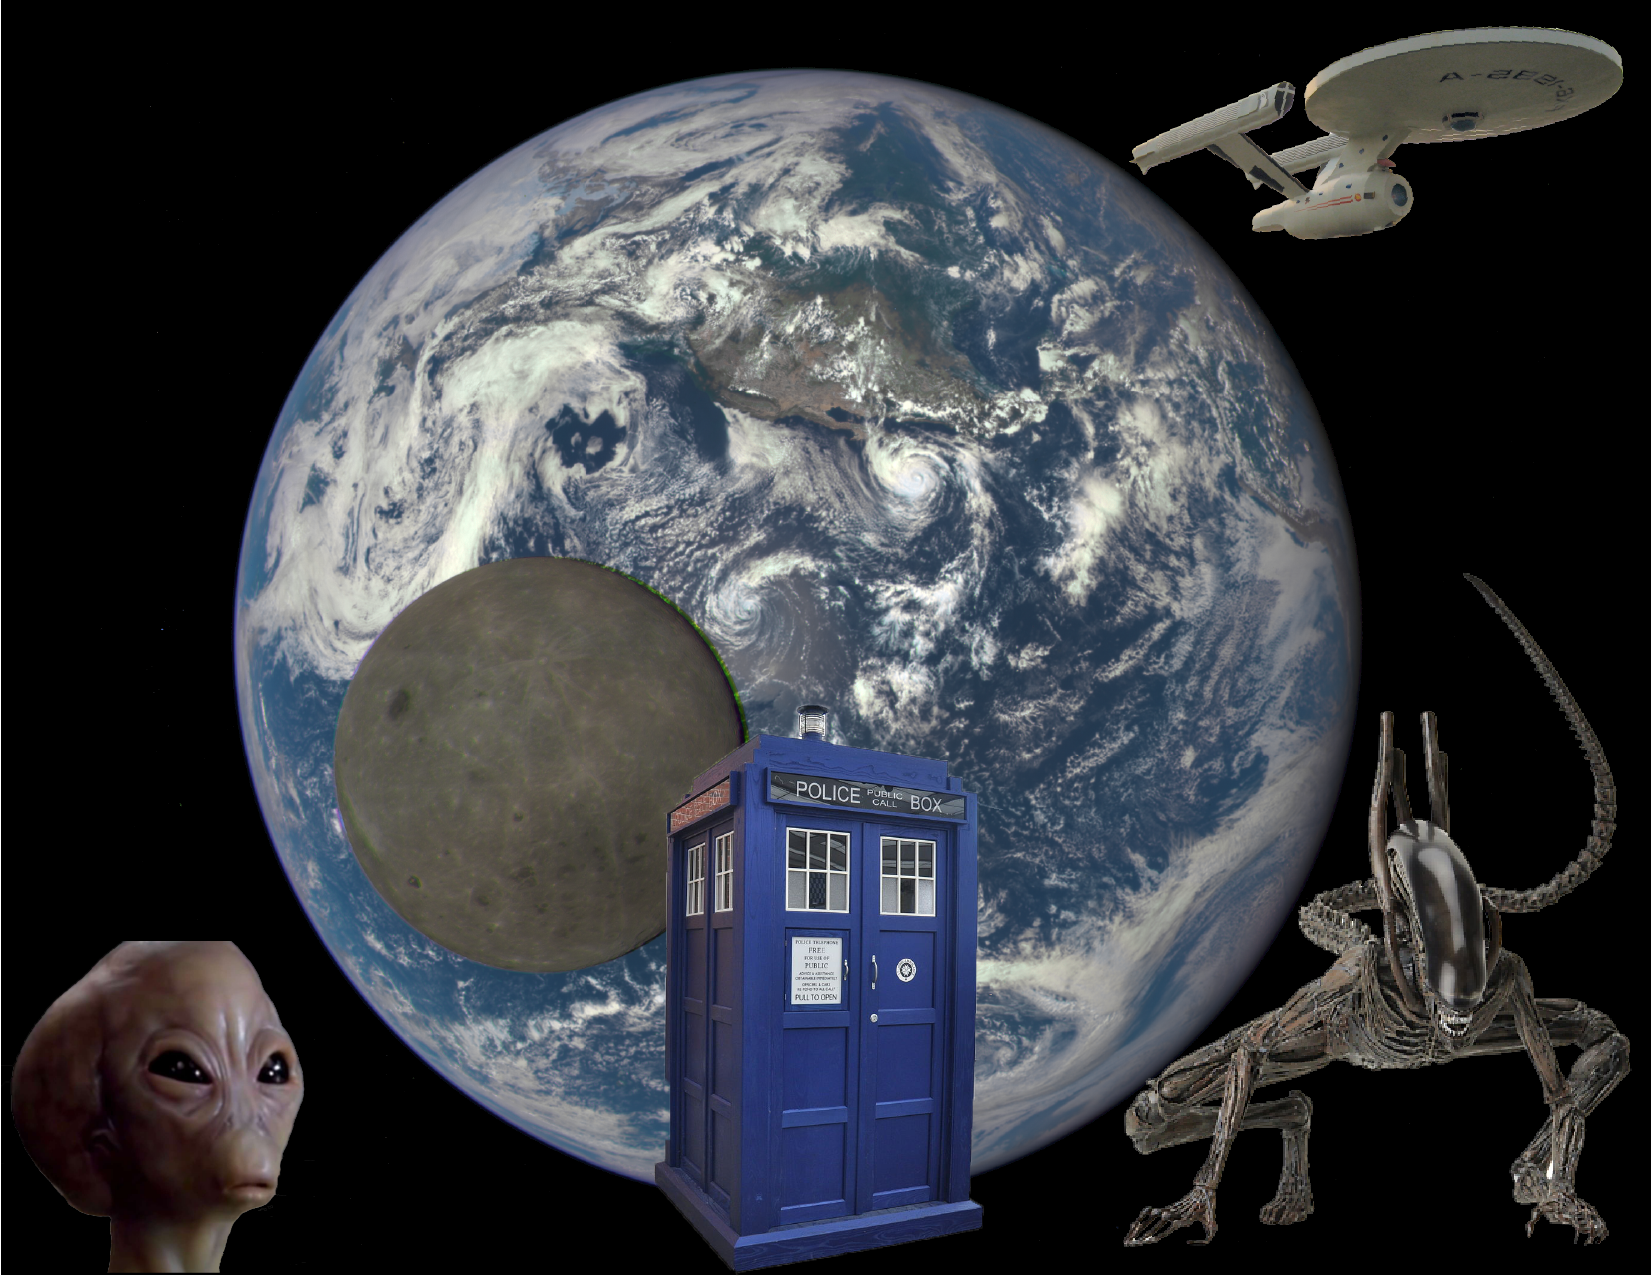 Image showing the Earth, the alien Thor from ‘Stargate SG1’, a xenomorphs from the ‘Aliens’ movies, the Enterprise from Star Trek, and the TARDIS from the Doctor Who TV show